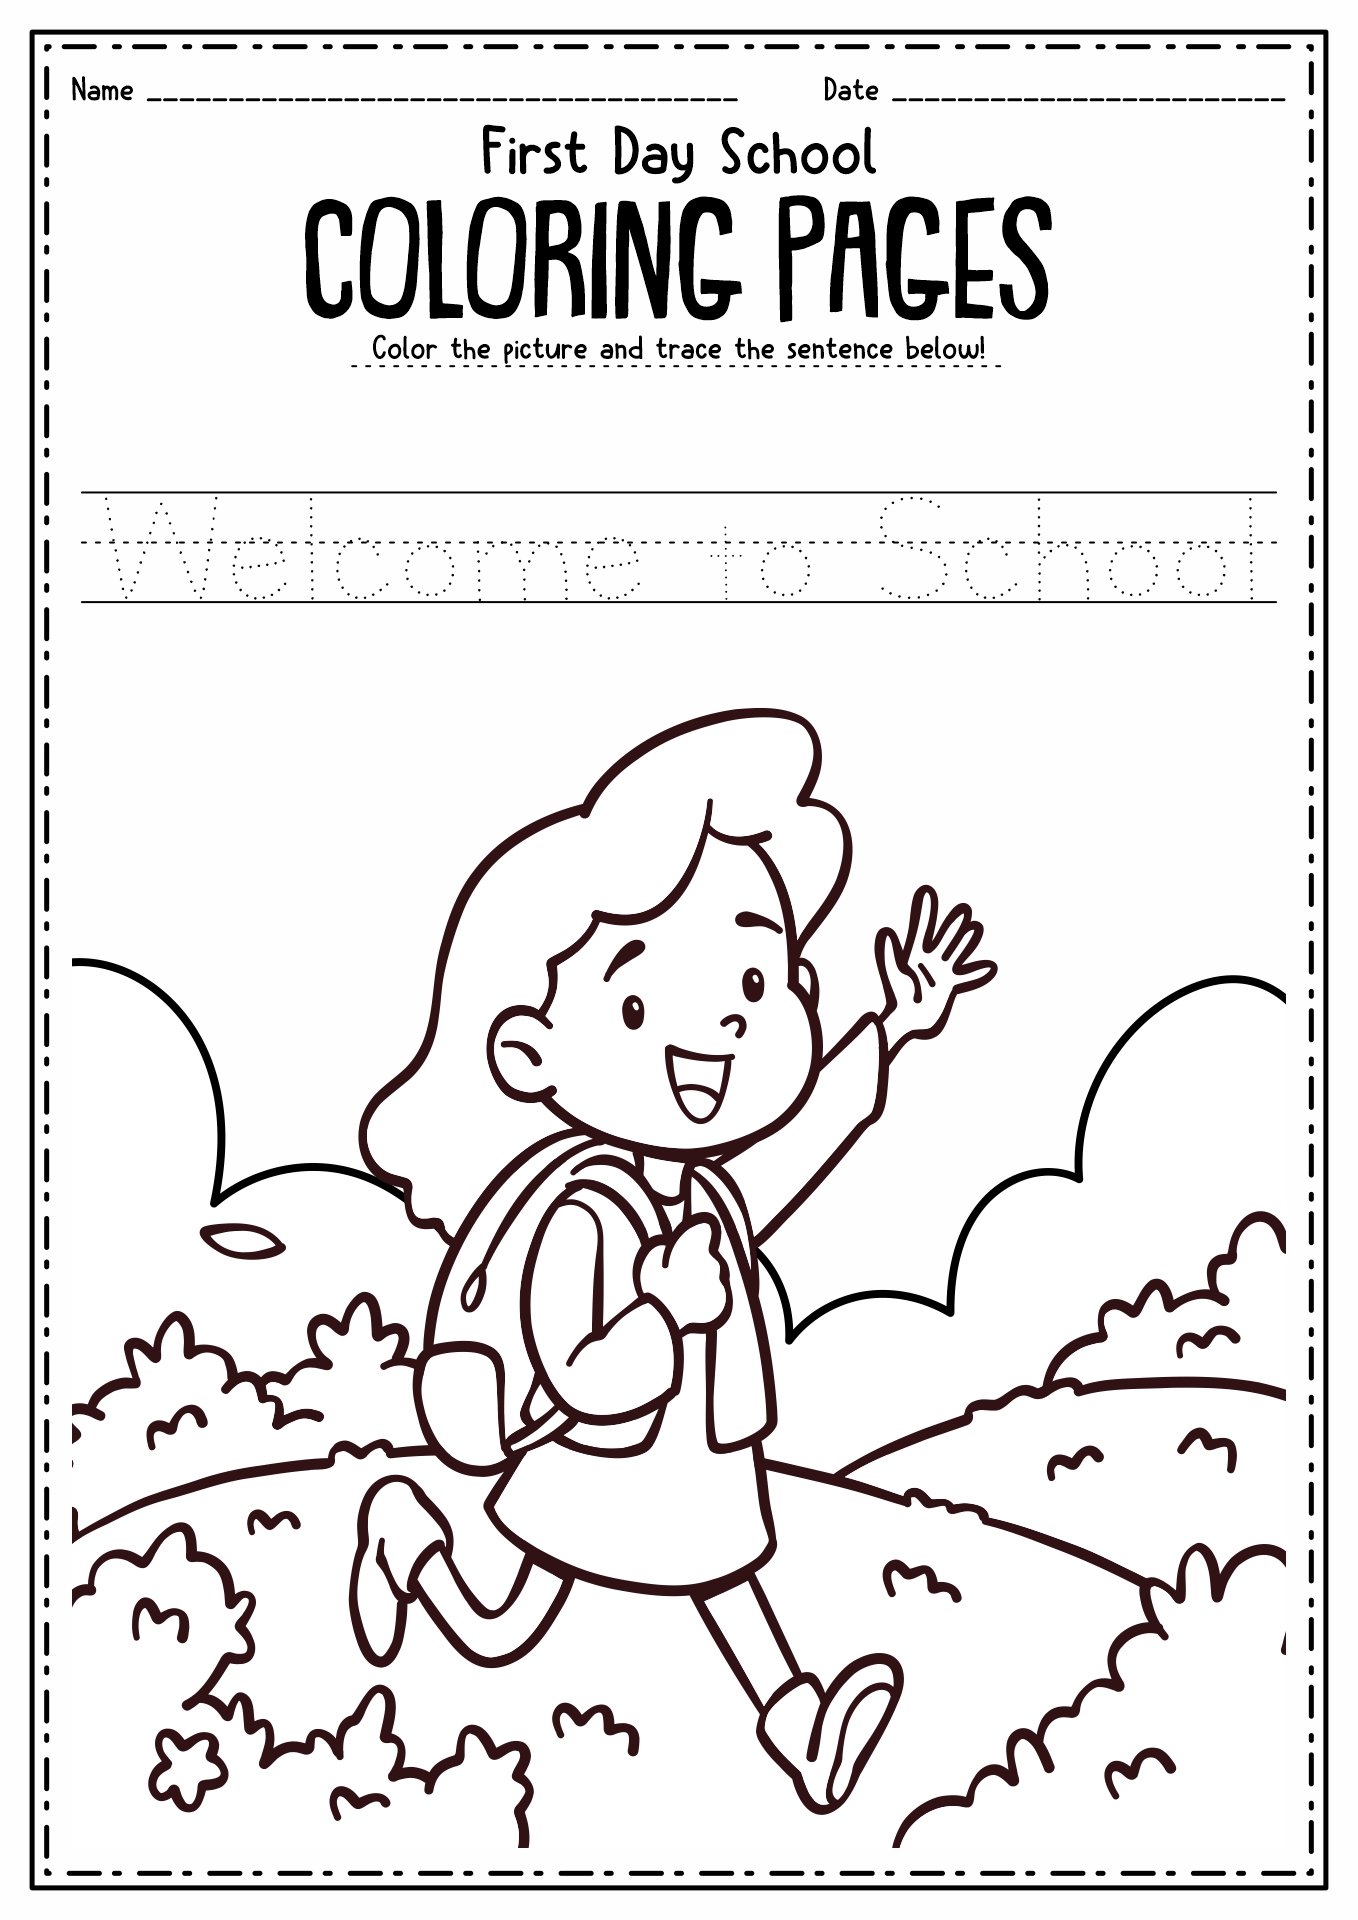 First Day School Kindergarten Coloring Pages